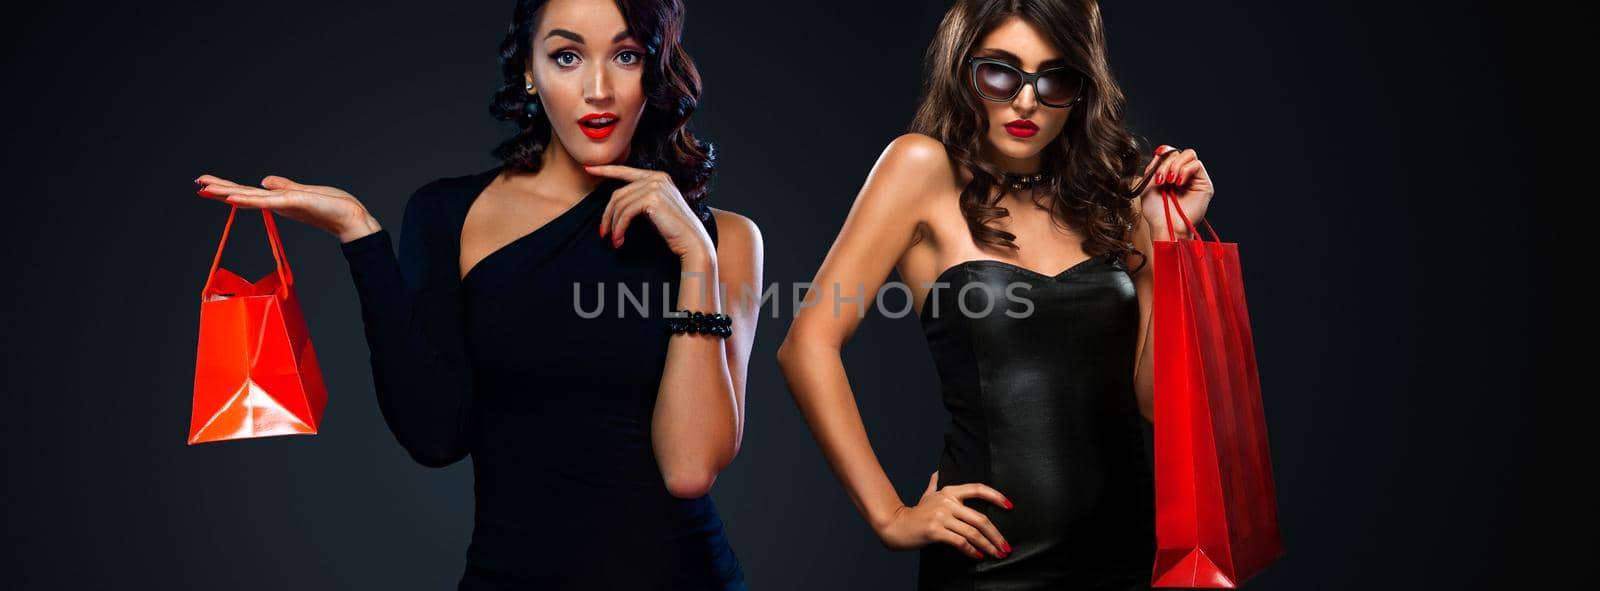 Black Friday sale concept for shops. Two woman in sunglasses holding red bag isolated on dark background at shopping mall. by MikeOrlov